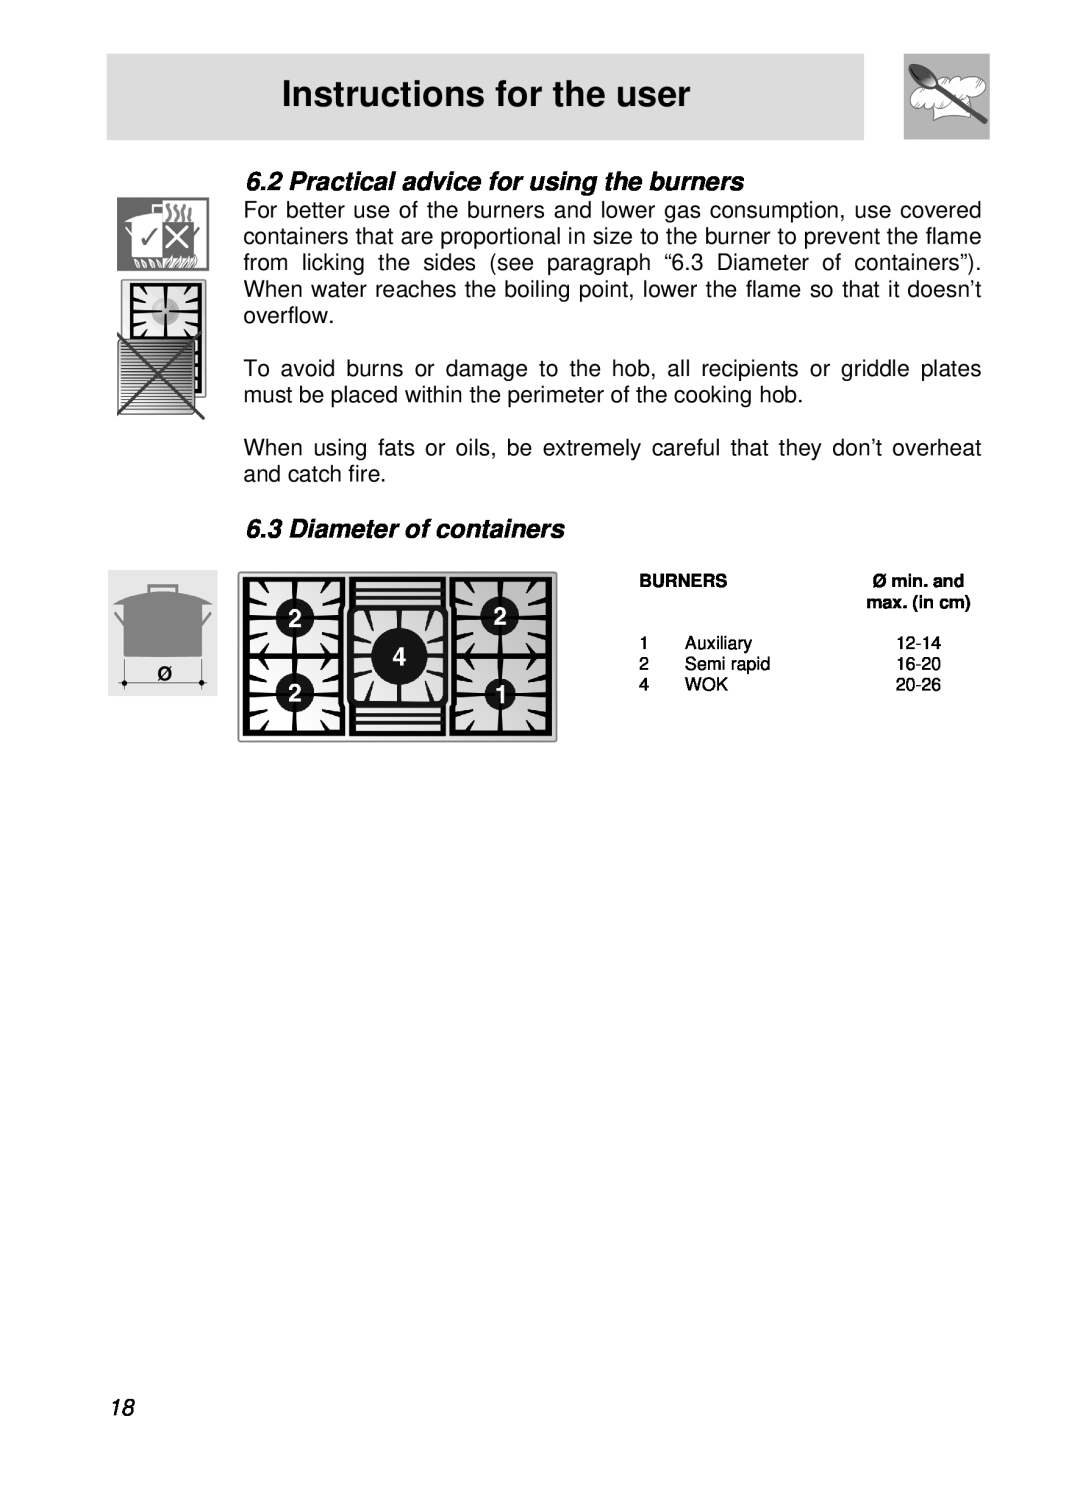 Smeg PGFA95F-1 manual Practical advice for using the burners, Diameter of containers, Instructions for the user, Burners 